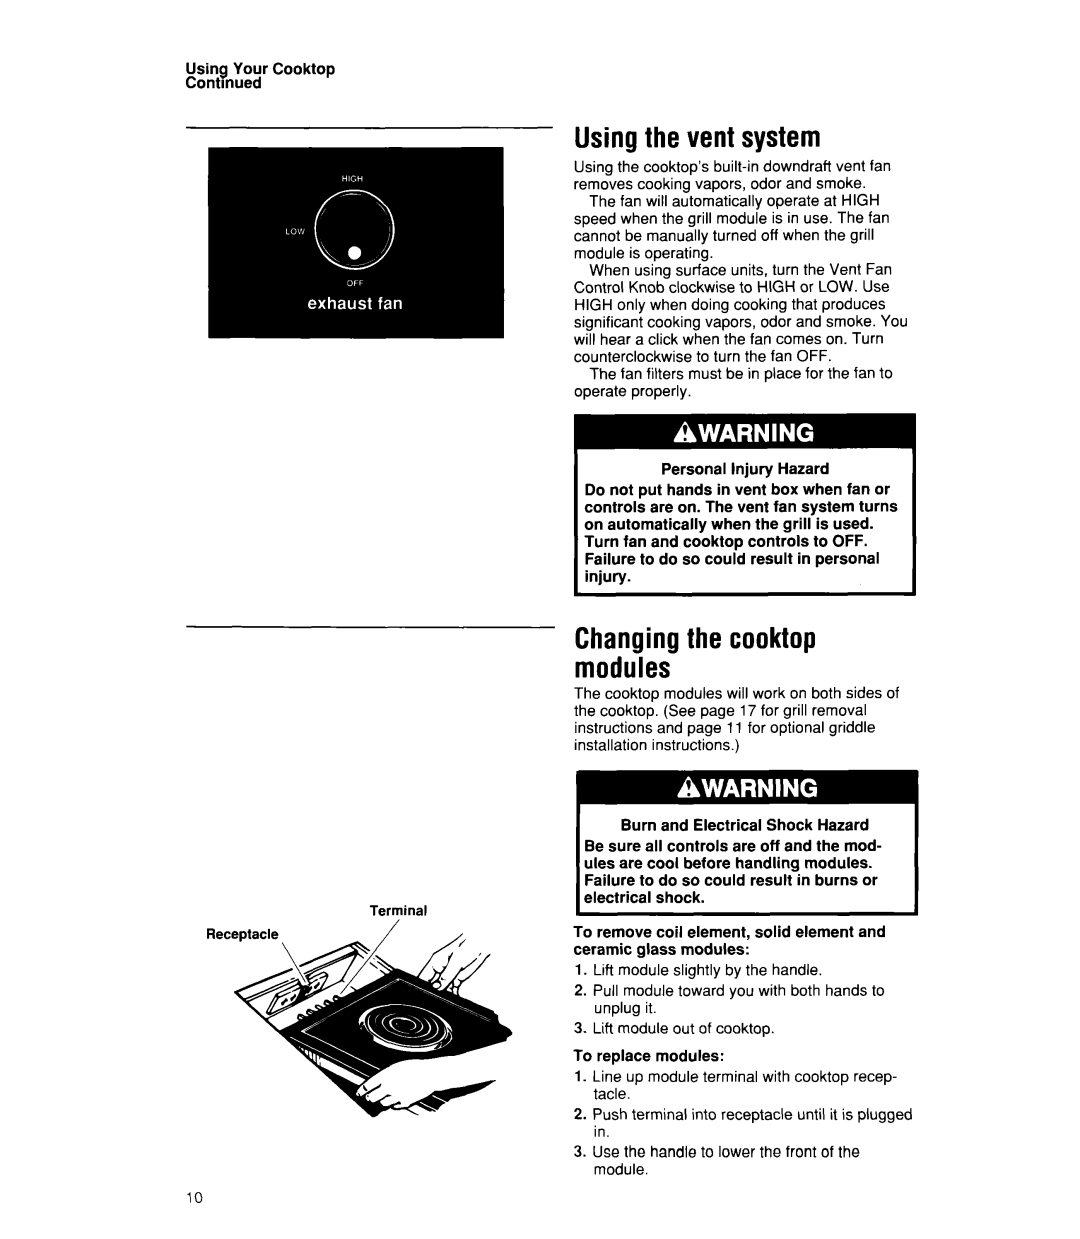 Whirlpool RC8900XX manual Usingthe vent system, Changingthe cooktop modules 